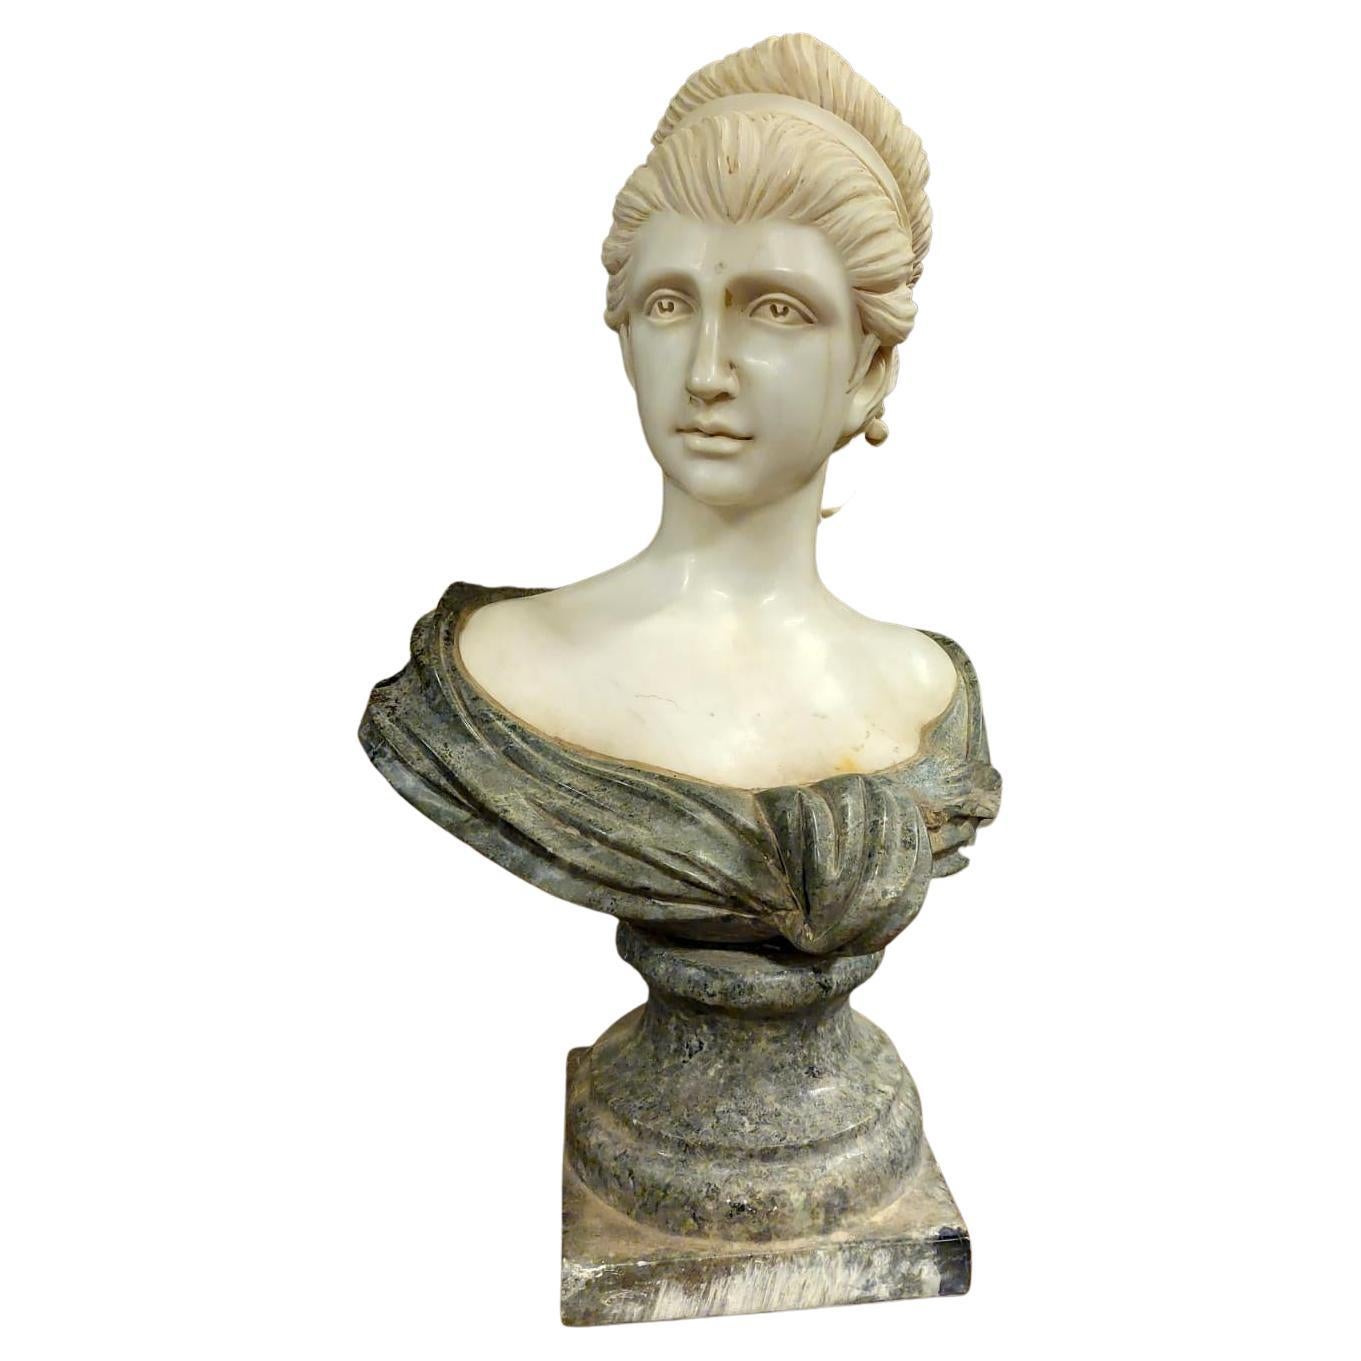 Antique Bust of a Woman Carved in White and Green Marble, 19th Century Italy